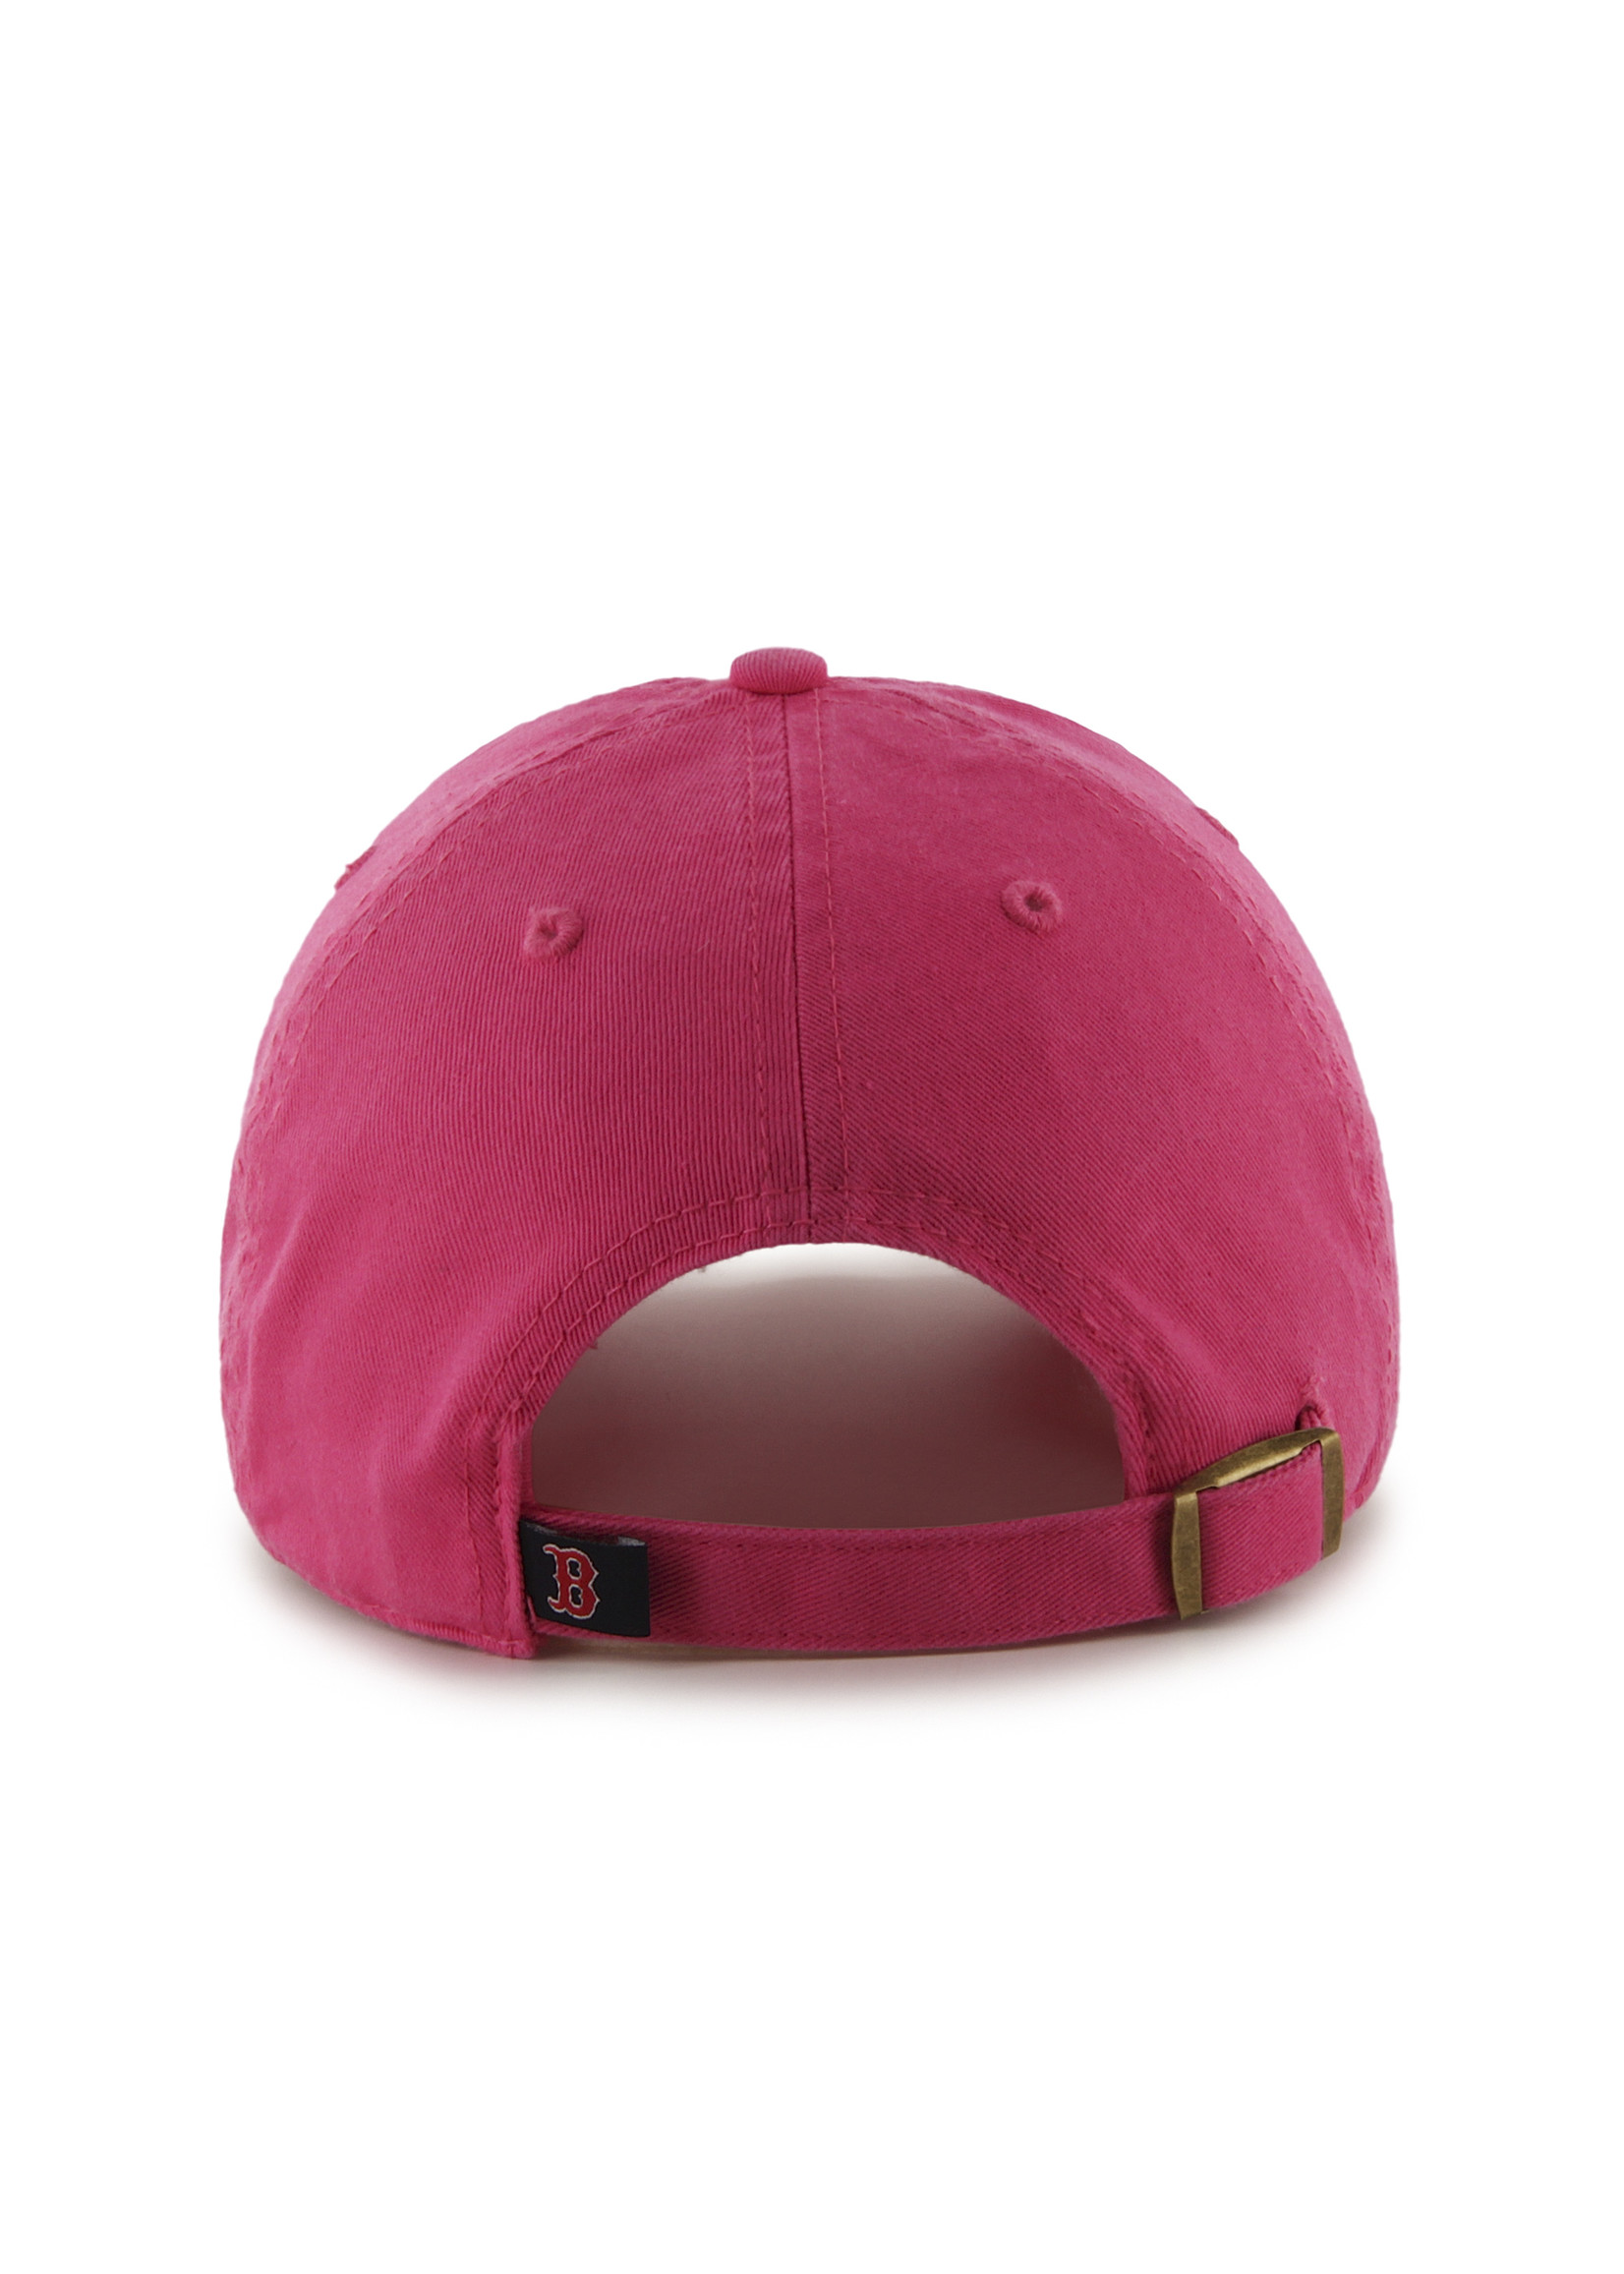 '47 Brand Boston Red Sox "B" Clean Up Hat Hot Pink/Navy Adjustable Women